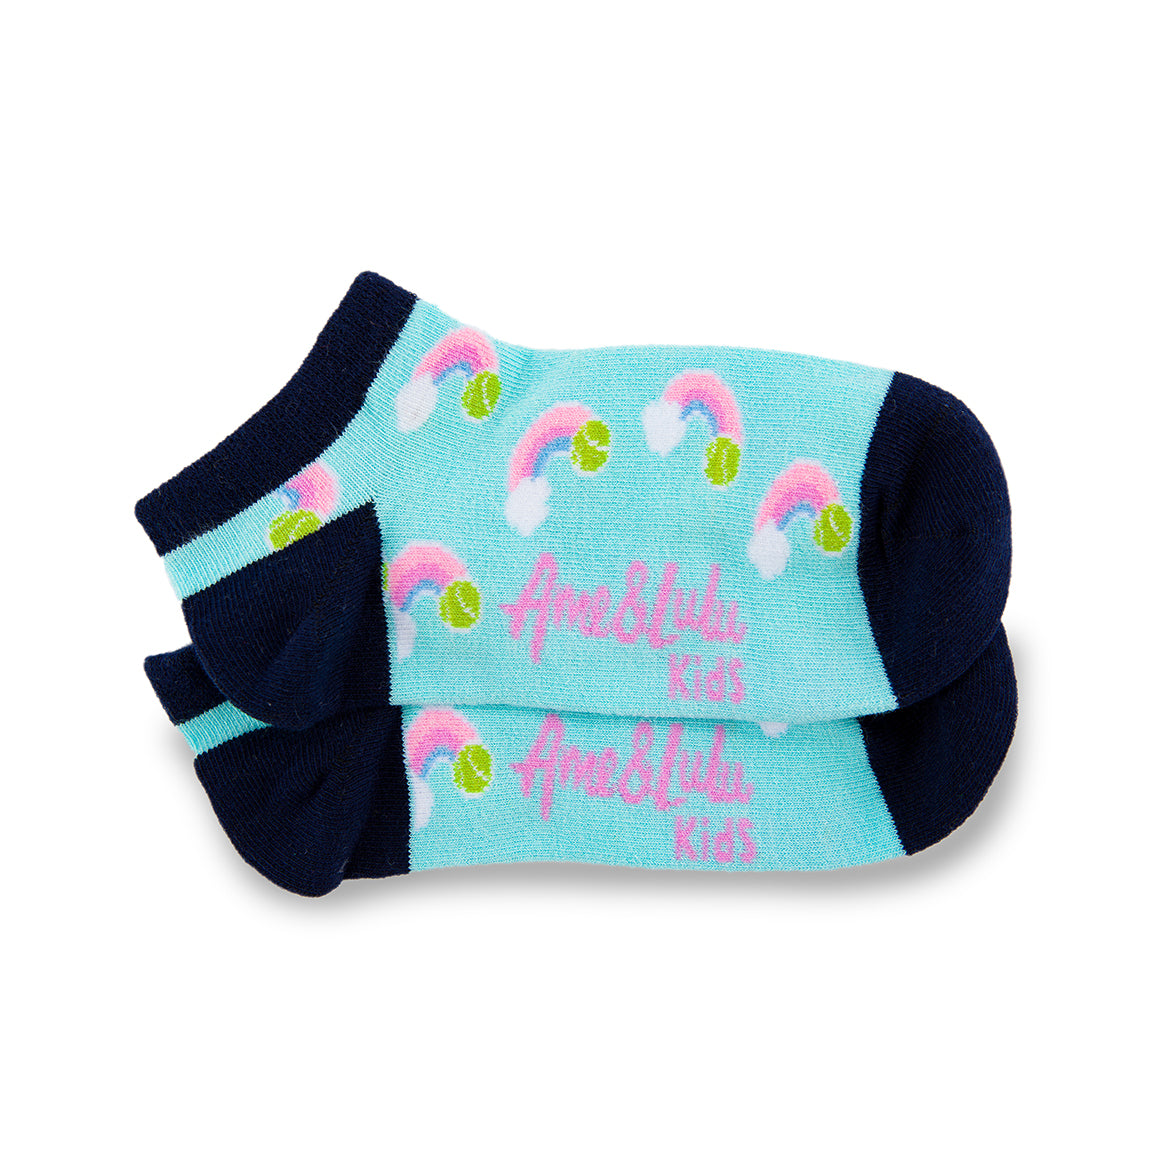 pair of light blue kids socks with navy heel and toes with pastel rainbow stitched on socks